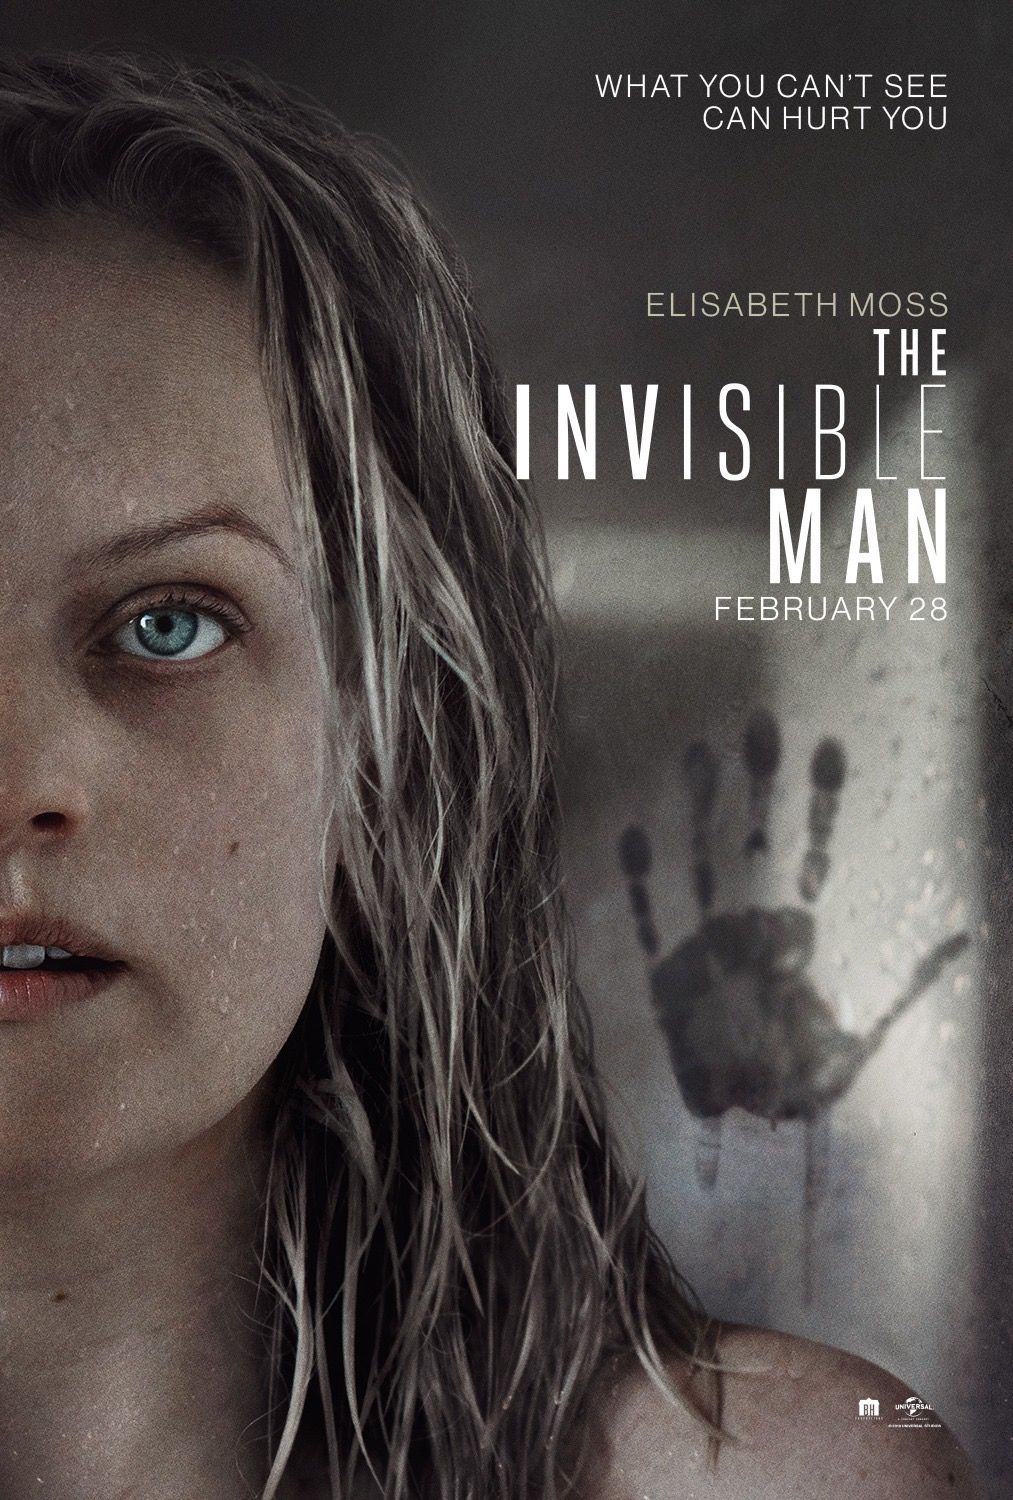 The Invisible Man (2020) Hindi Dubbed Full Movie